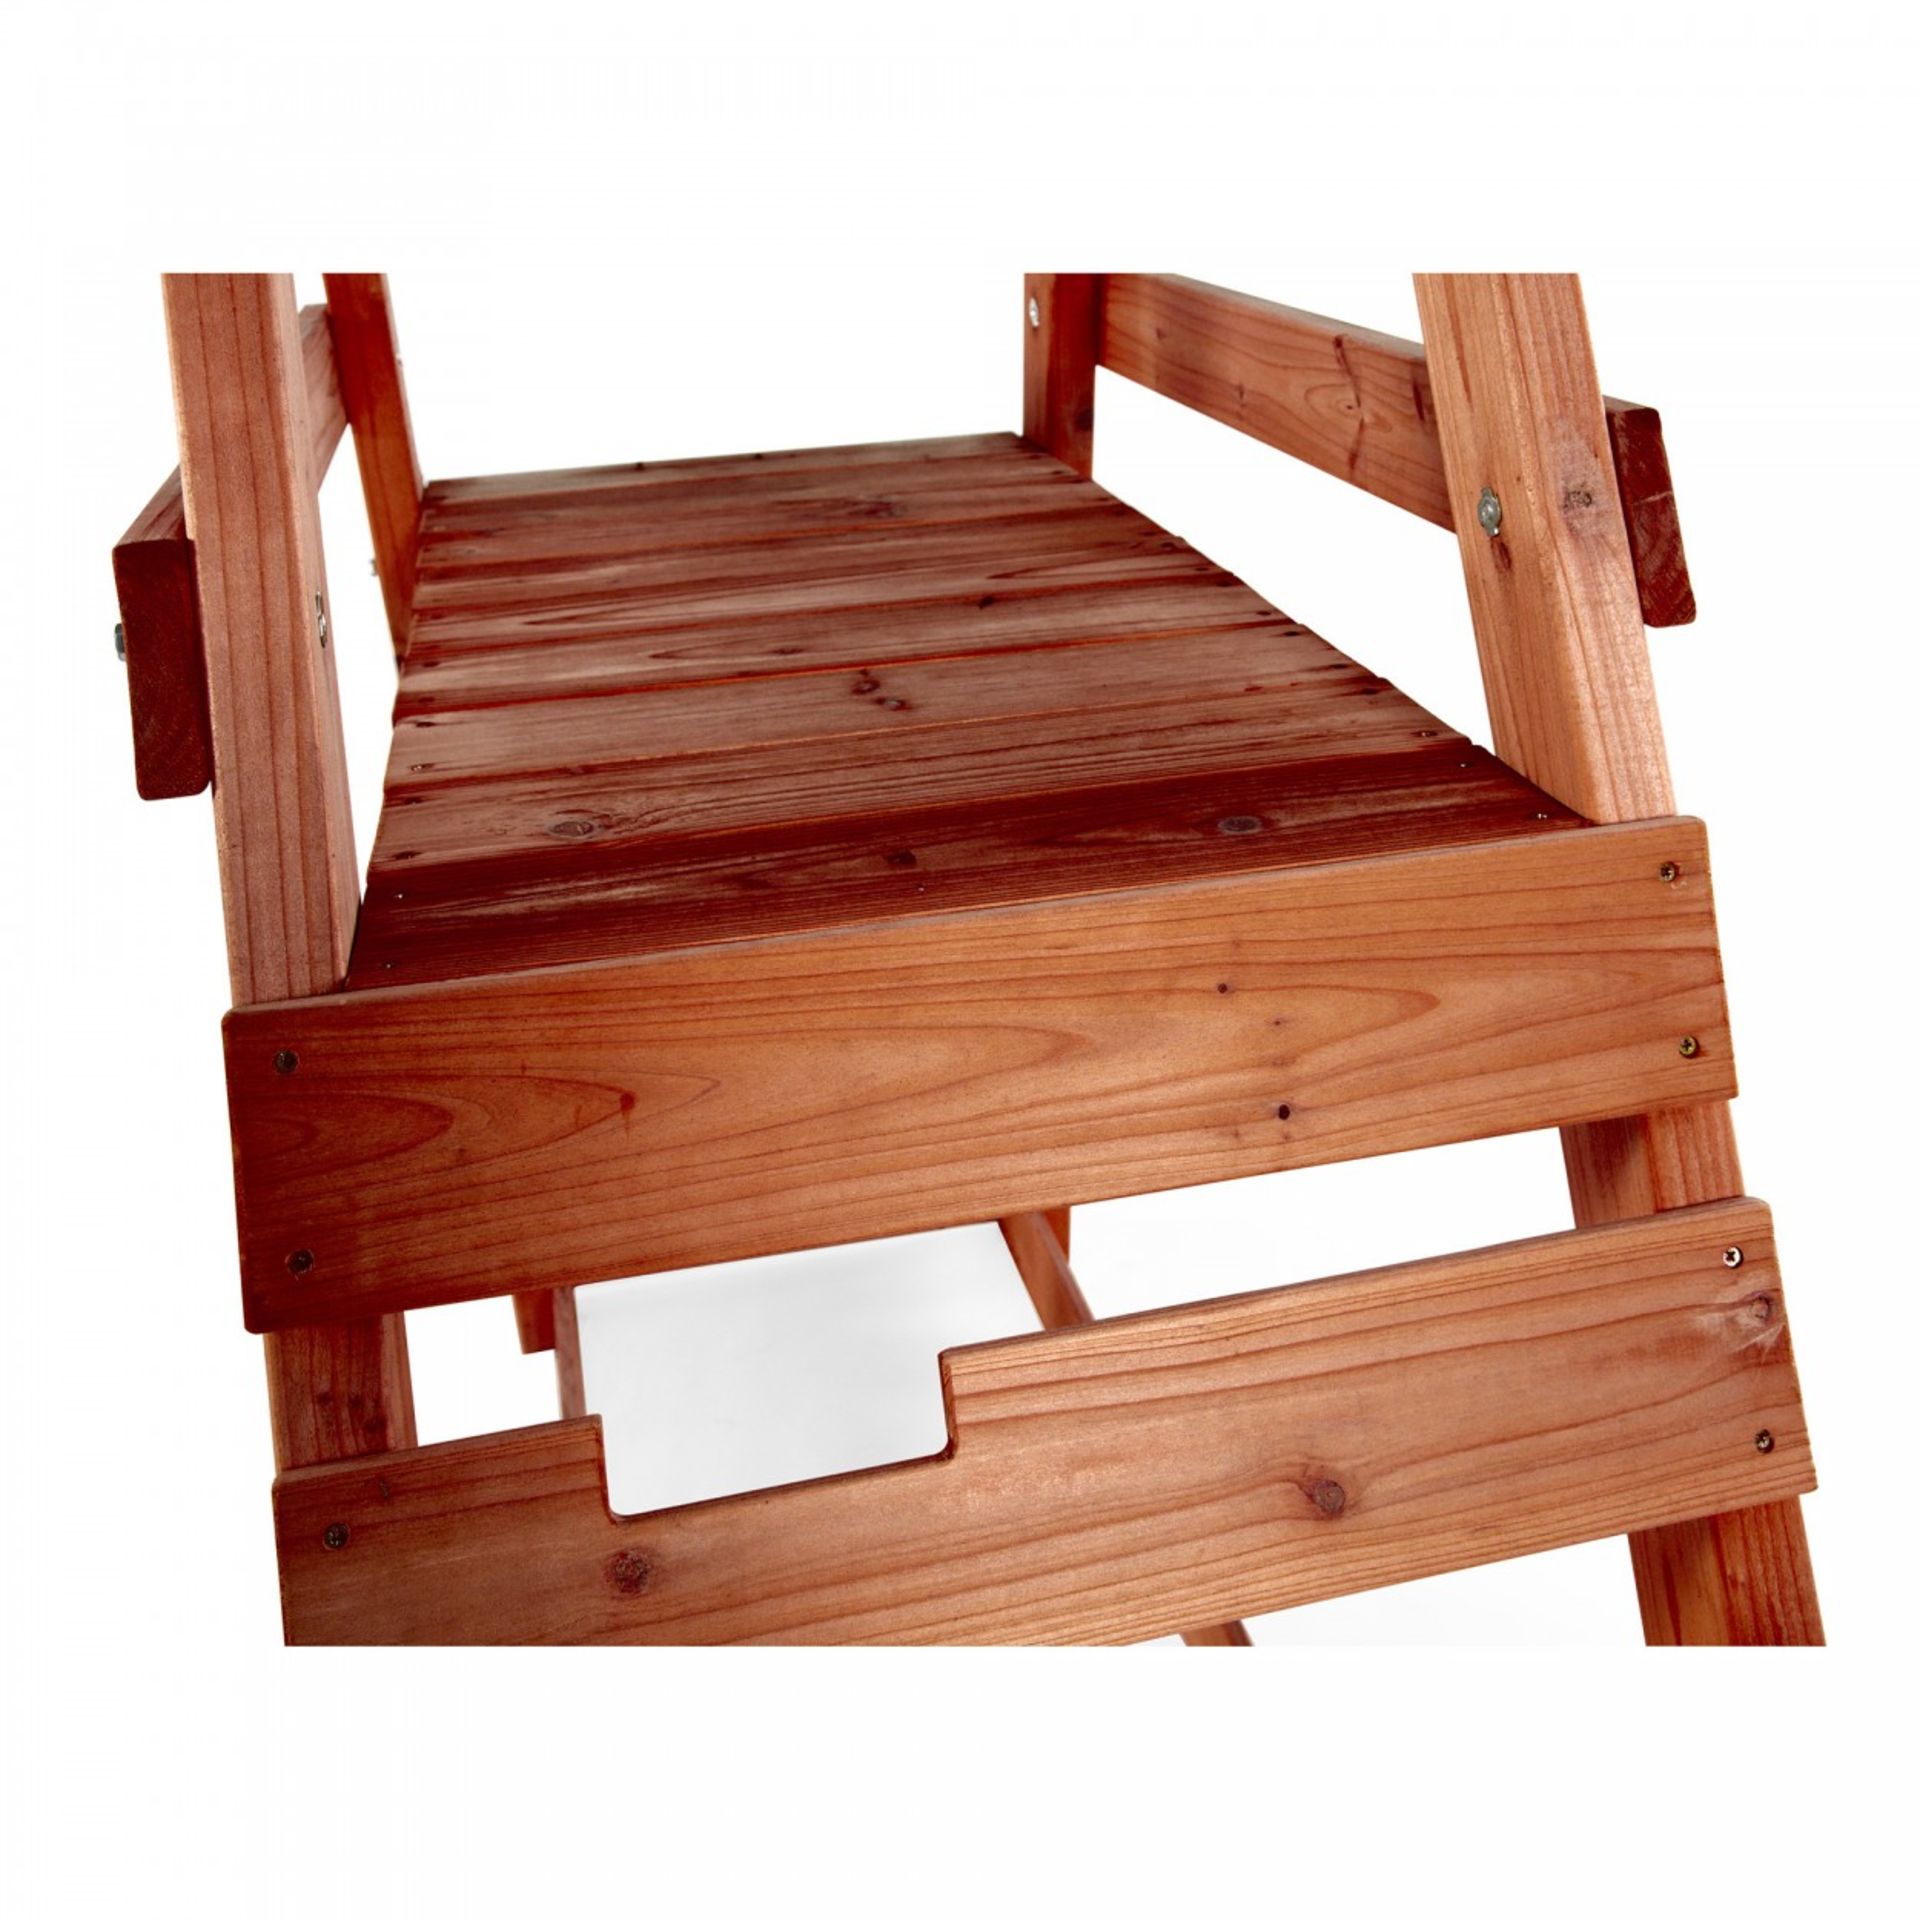 1 x Plum Products Tamarin Wooden Outdoor Play Centre. BRAND NEW. RRP £399.99 each! The Tamarin - Image 3 of 5